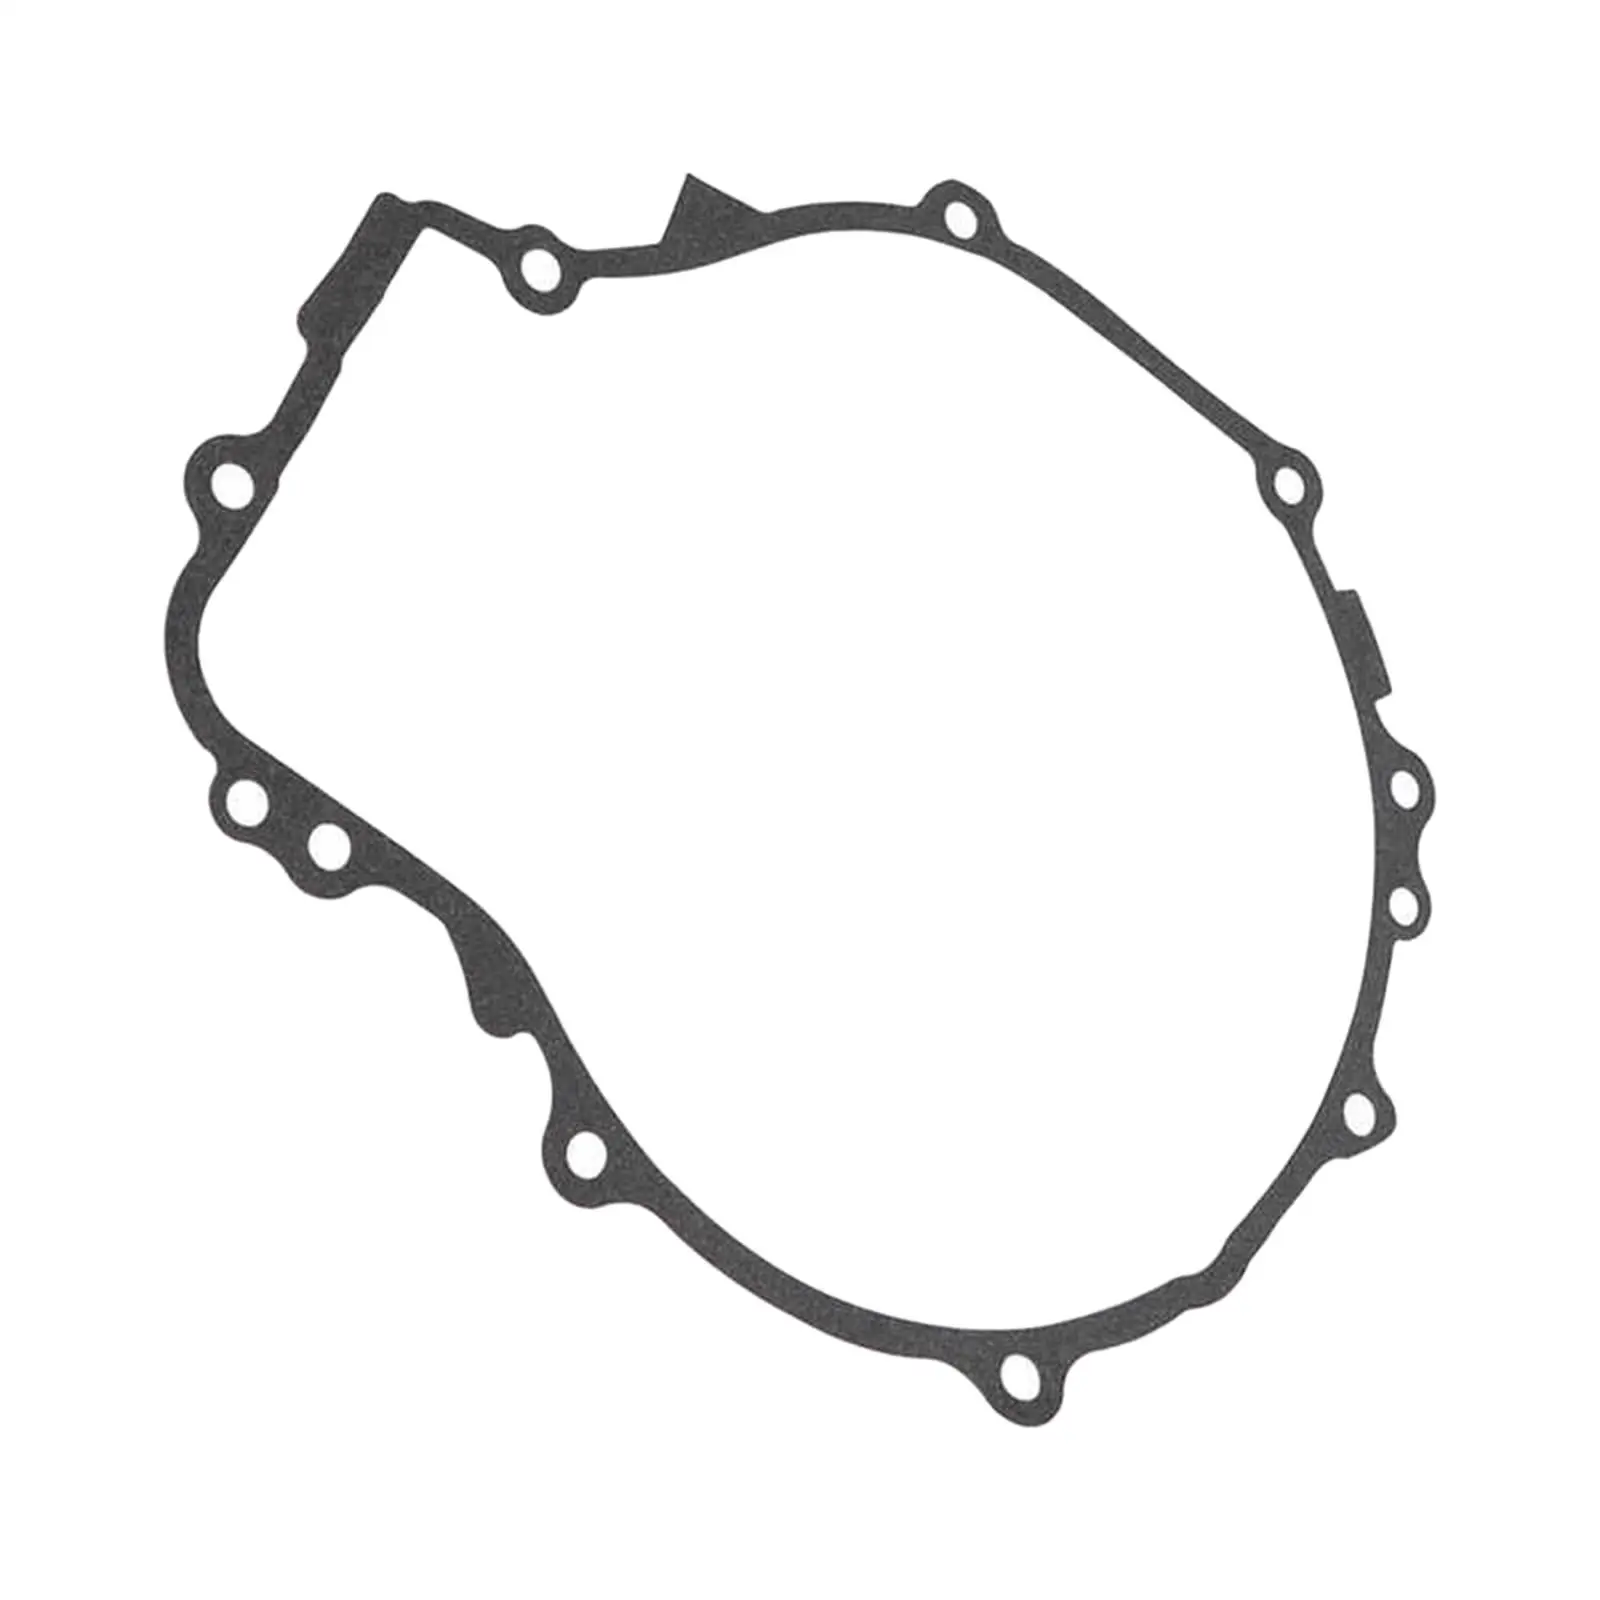 Auto Pull Start Gasket 3084933 for Polaris Sportsman 500 1996?2011 Replacement Easy Installation